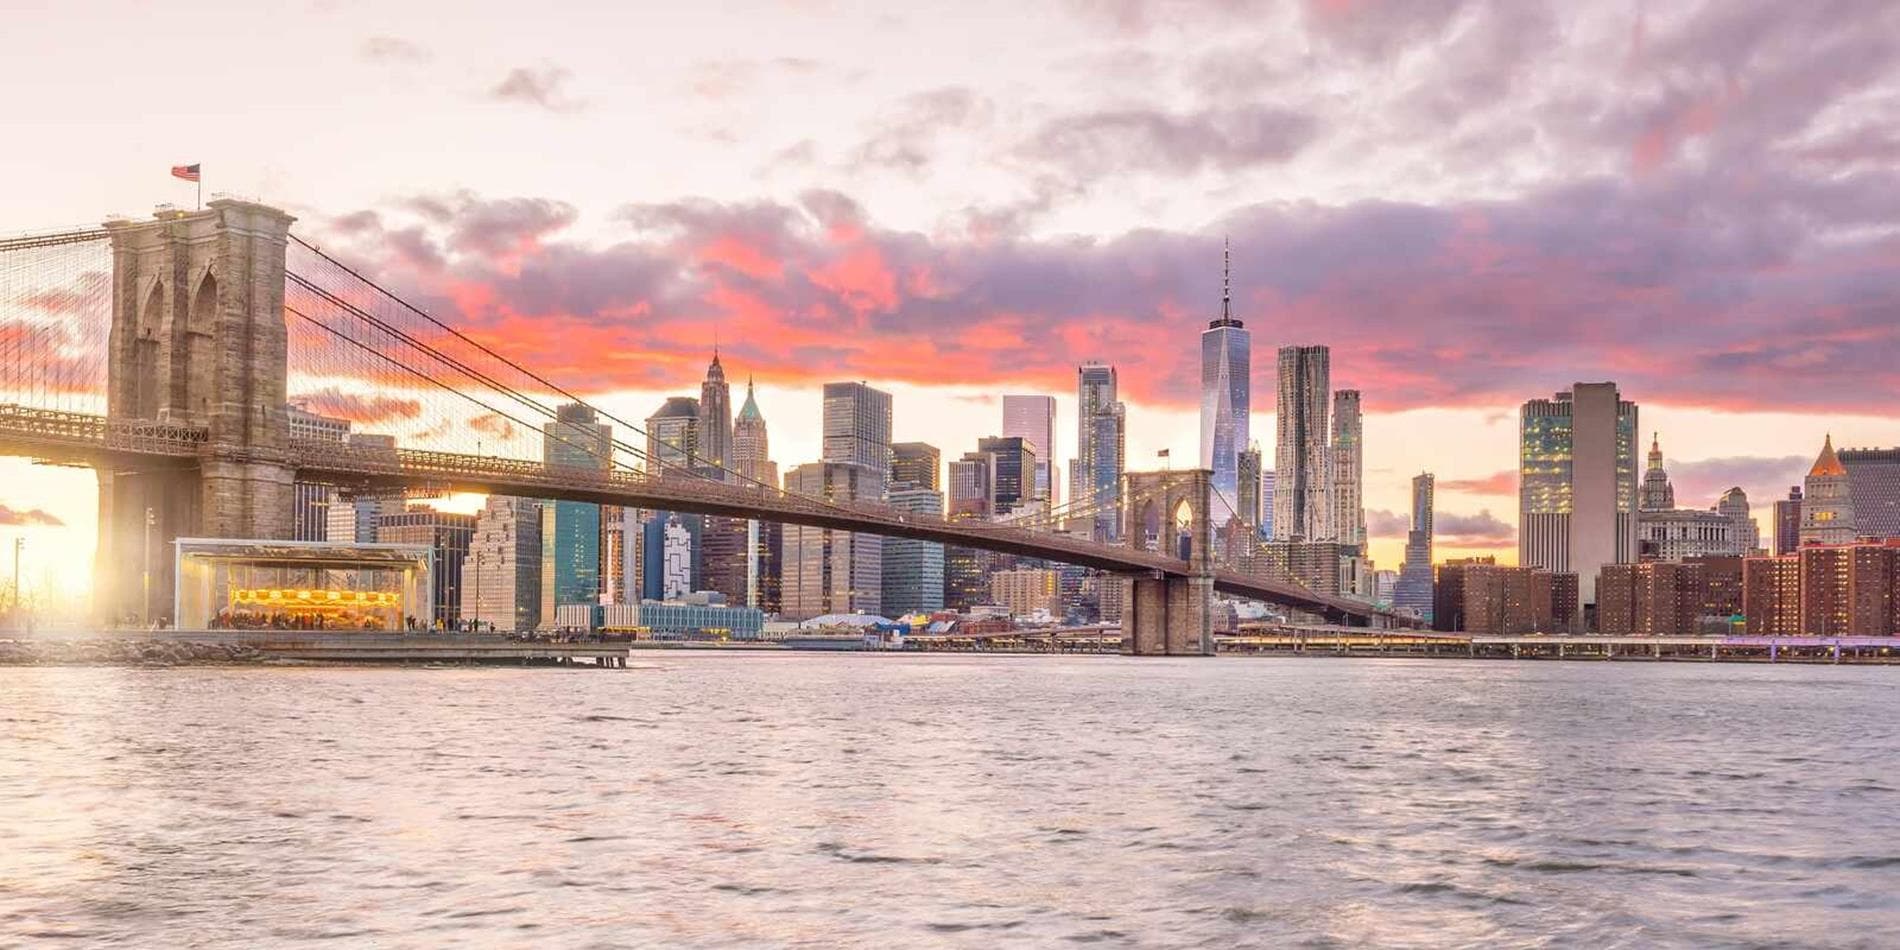 As the sunsets over Brooklyn Bridge in New York City